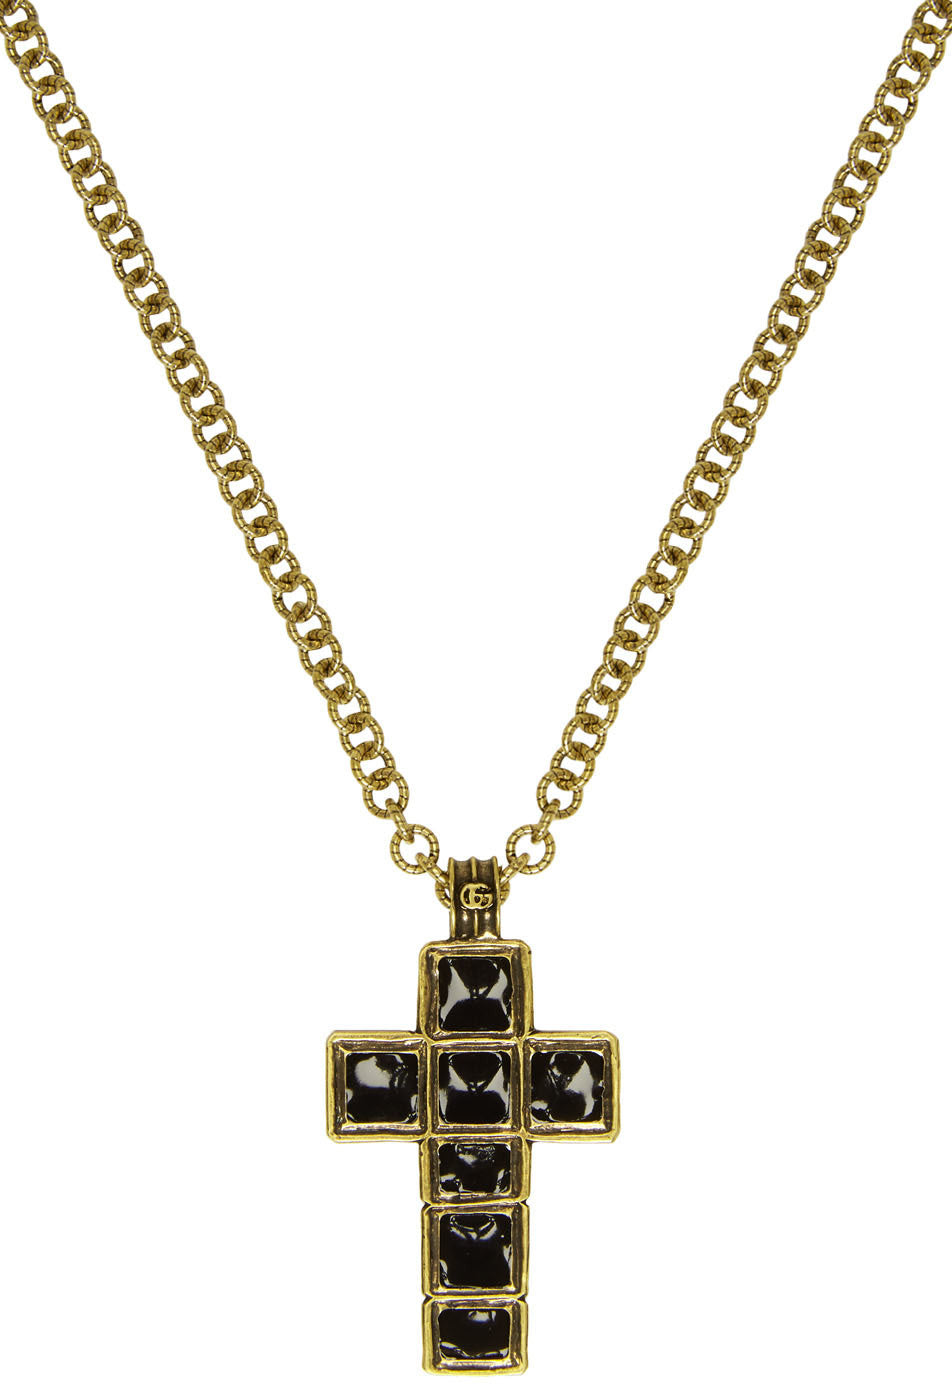 Gucci Enameled Medium Cross Necklace in Gold